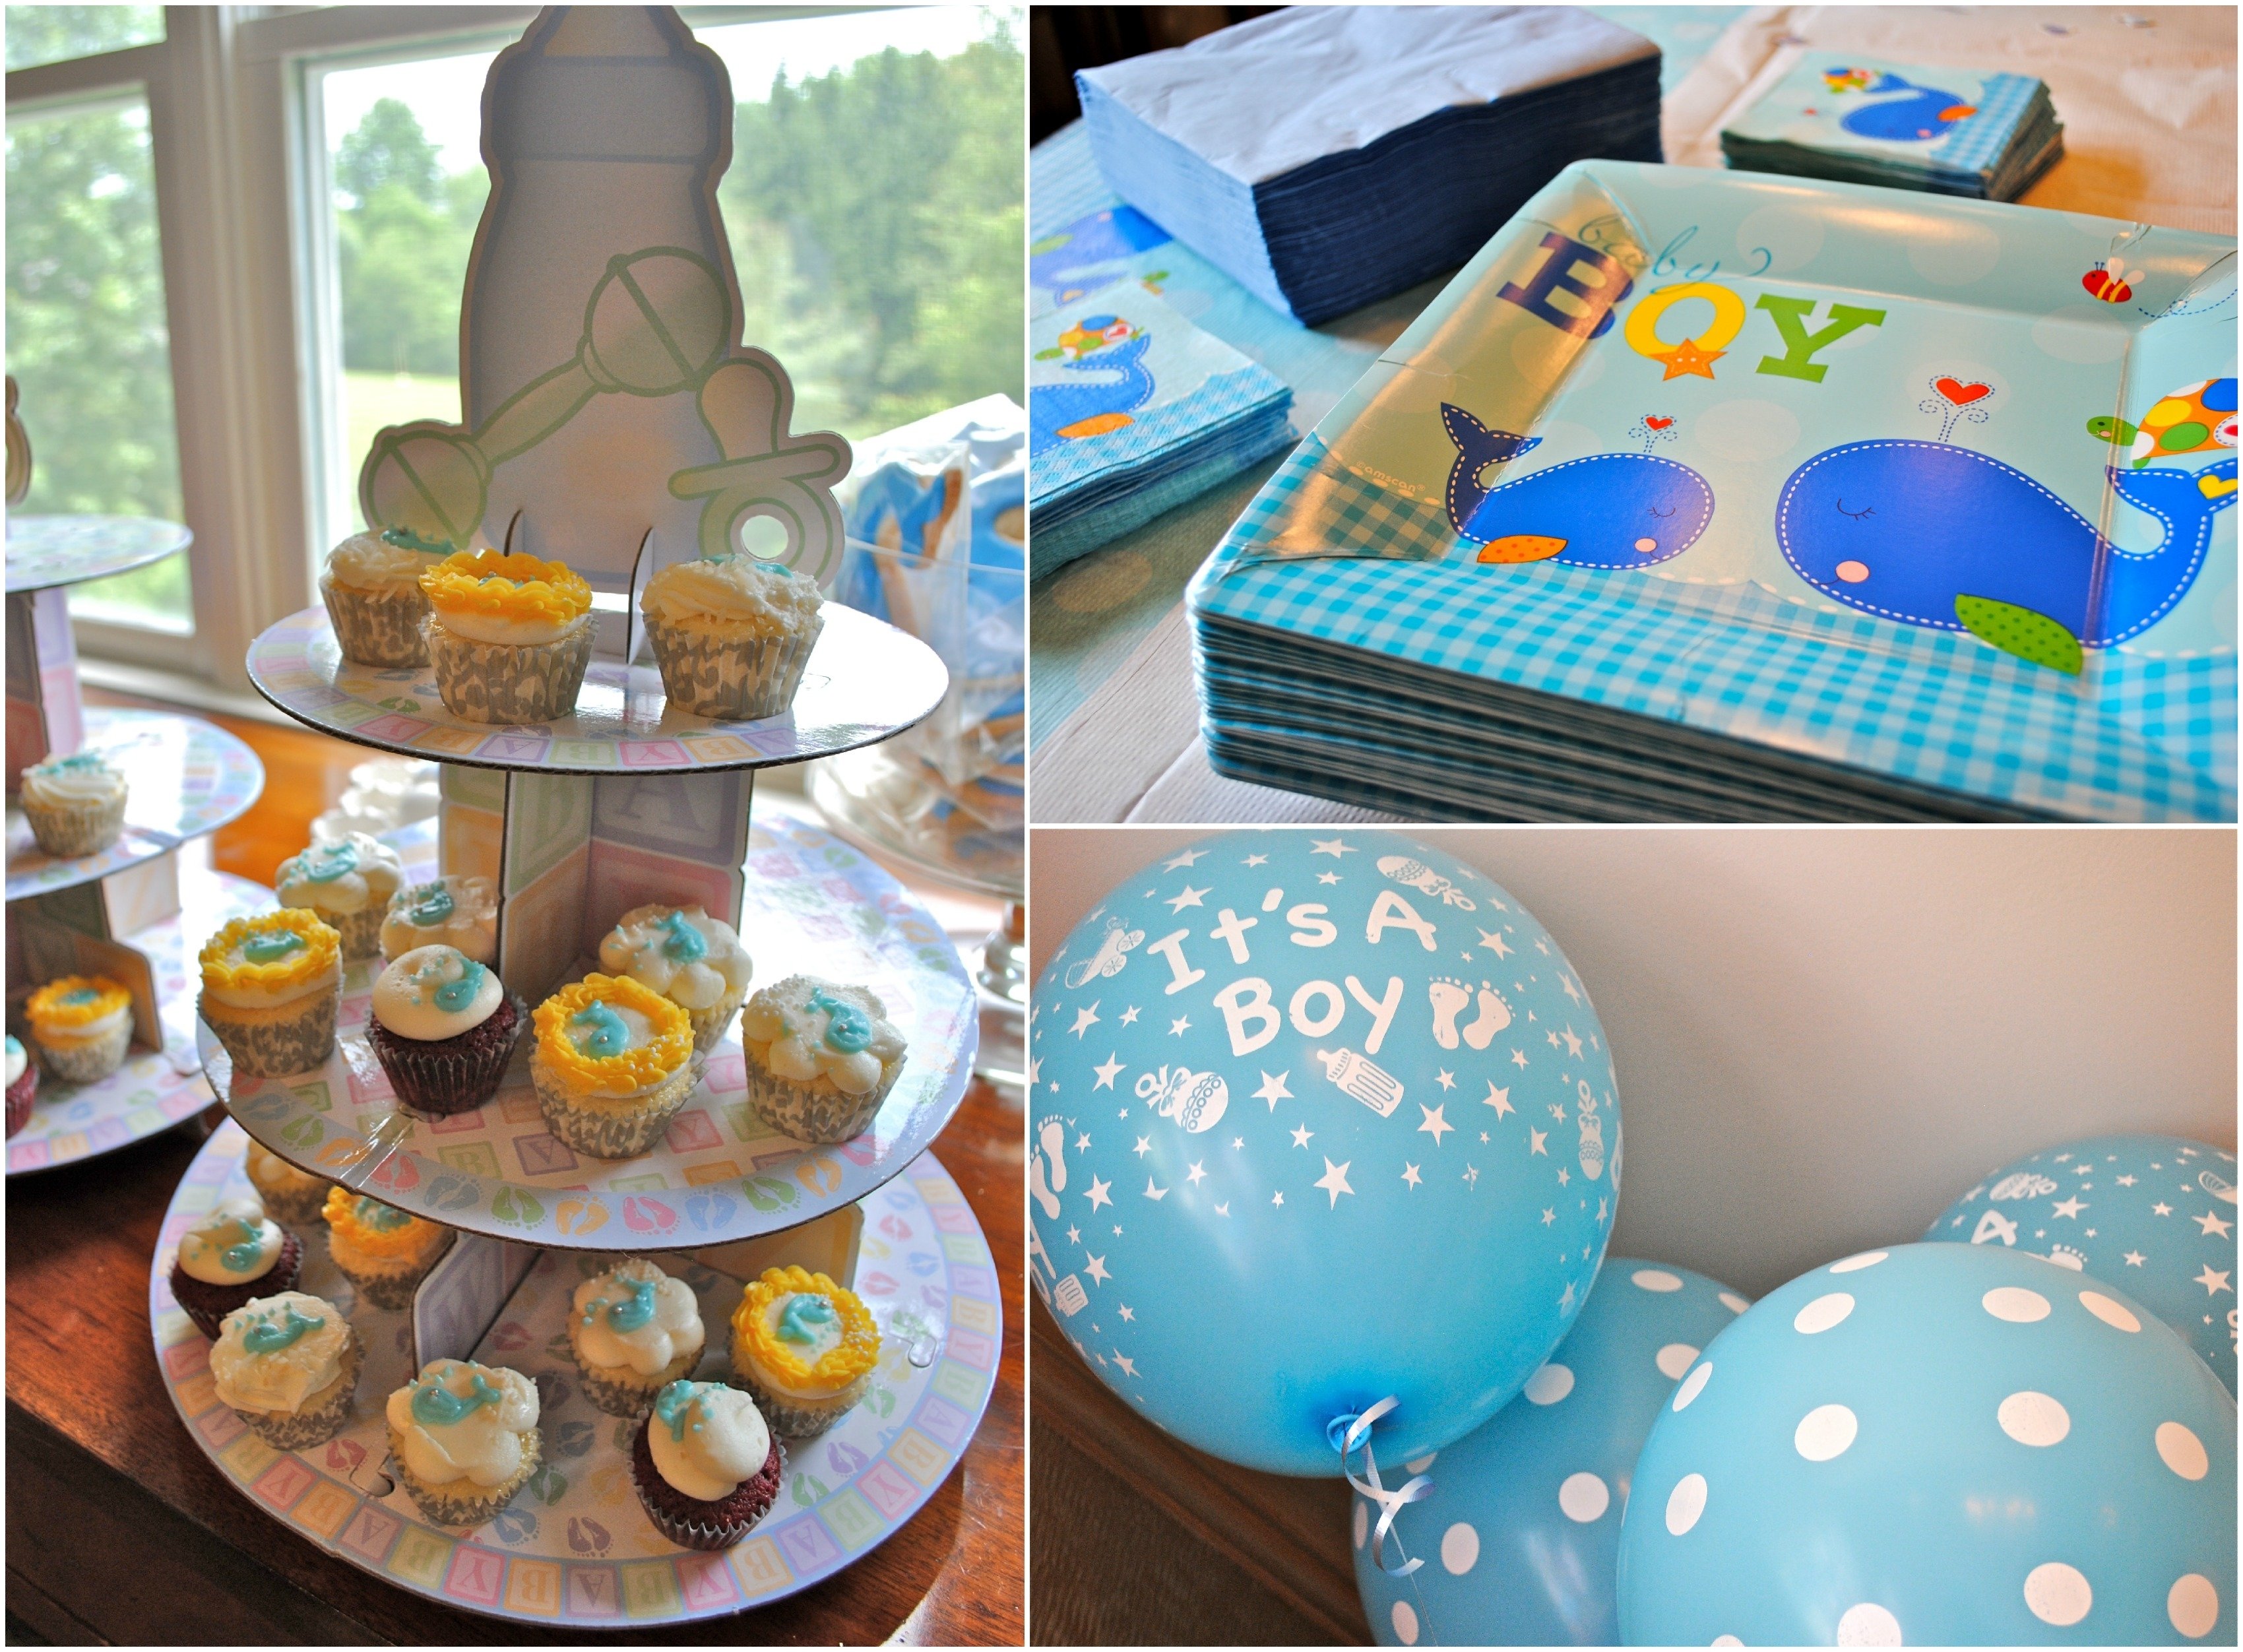 10 Gorgeous Baby Shower Favors Ideas For Boys photo baby shower themes etsy oh image 1 2022